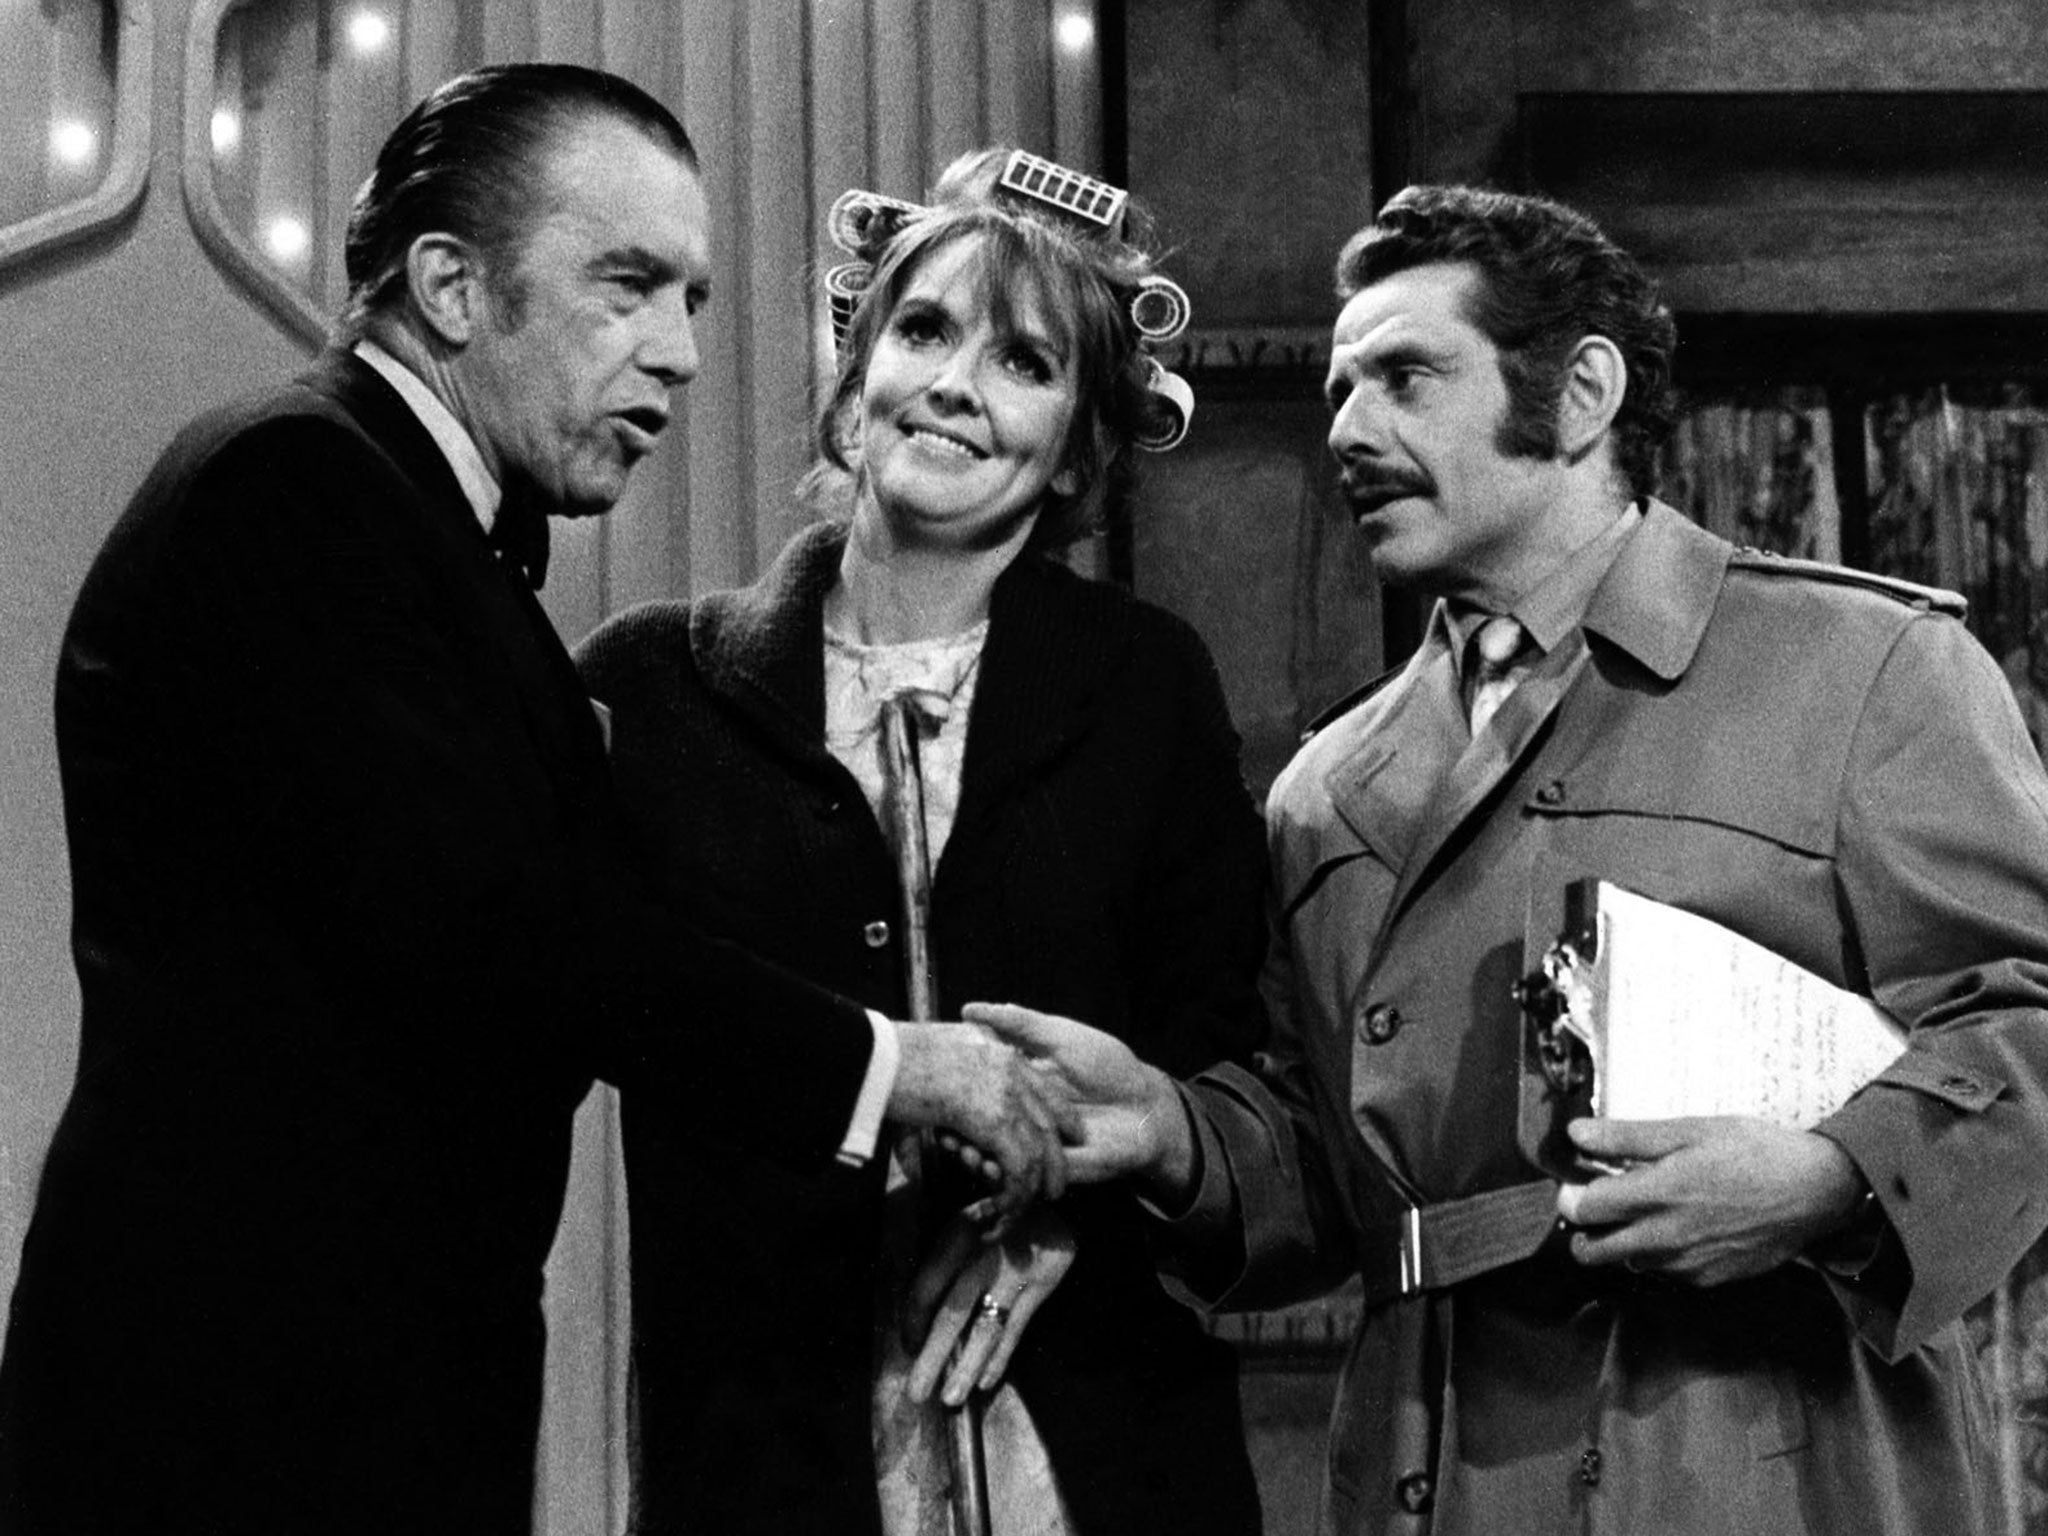 Meara and Stiller, centre and right, are greeted by the host of ‘The Ed Sullivan Show’ in 1970